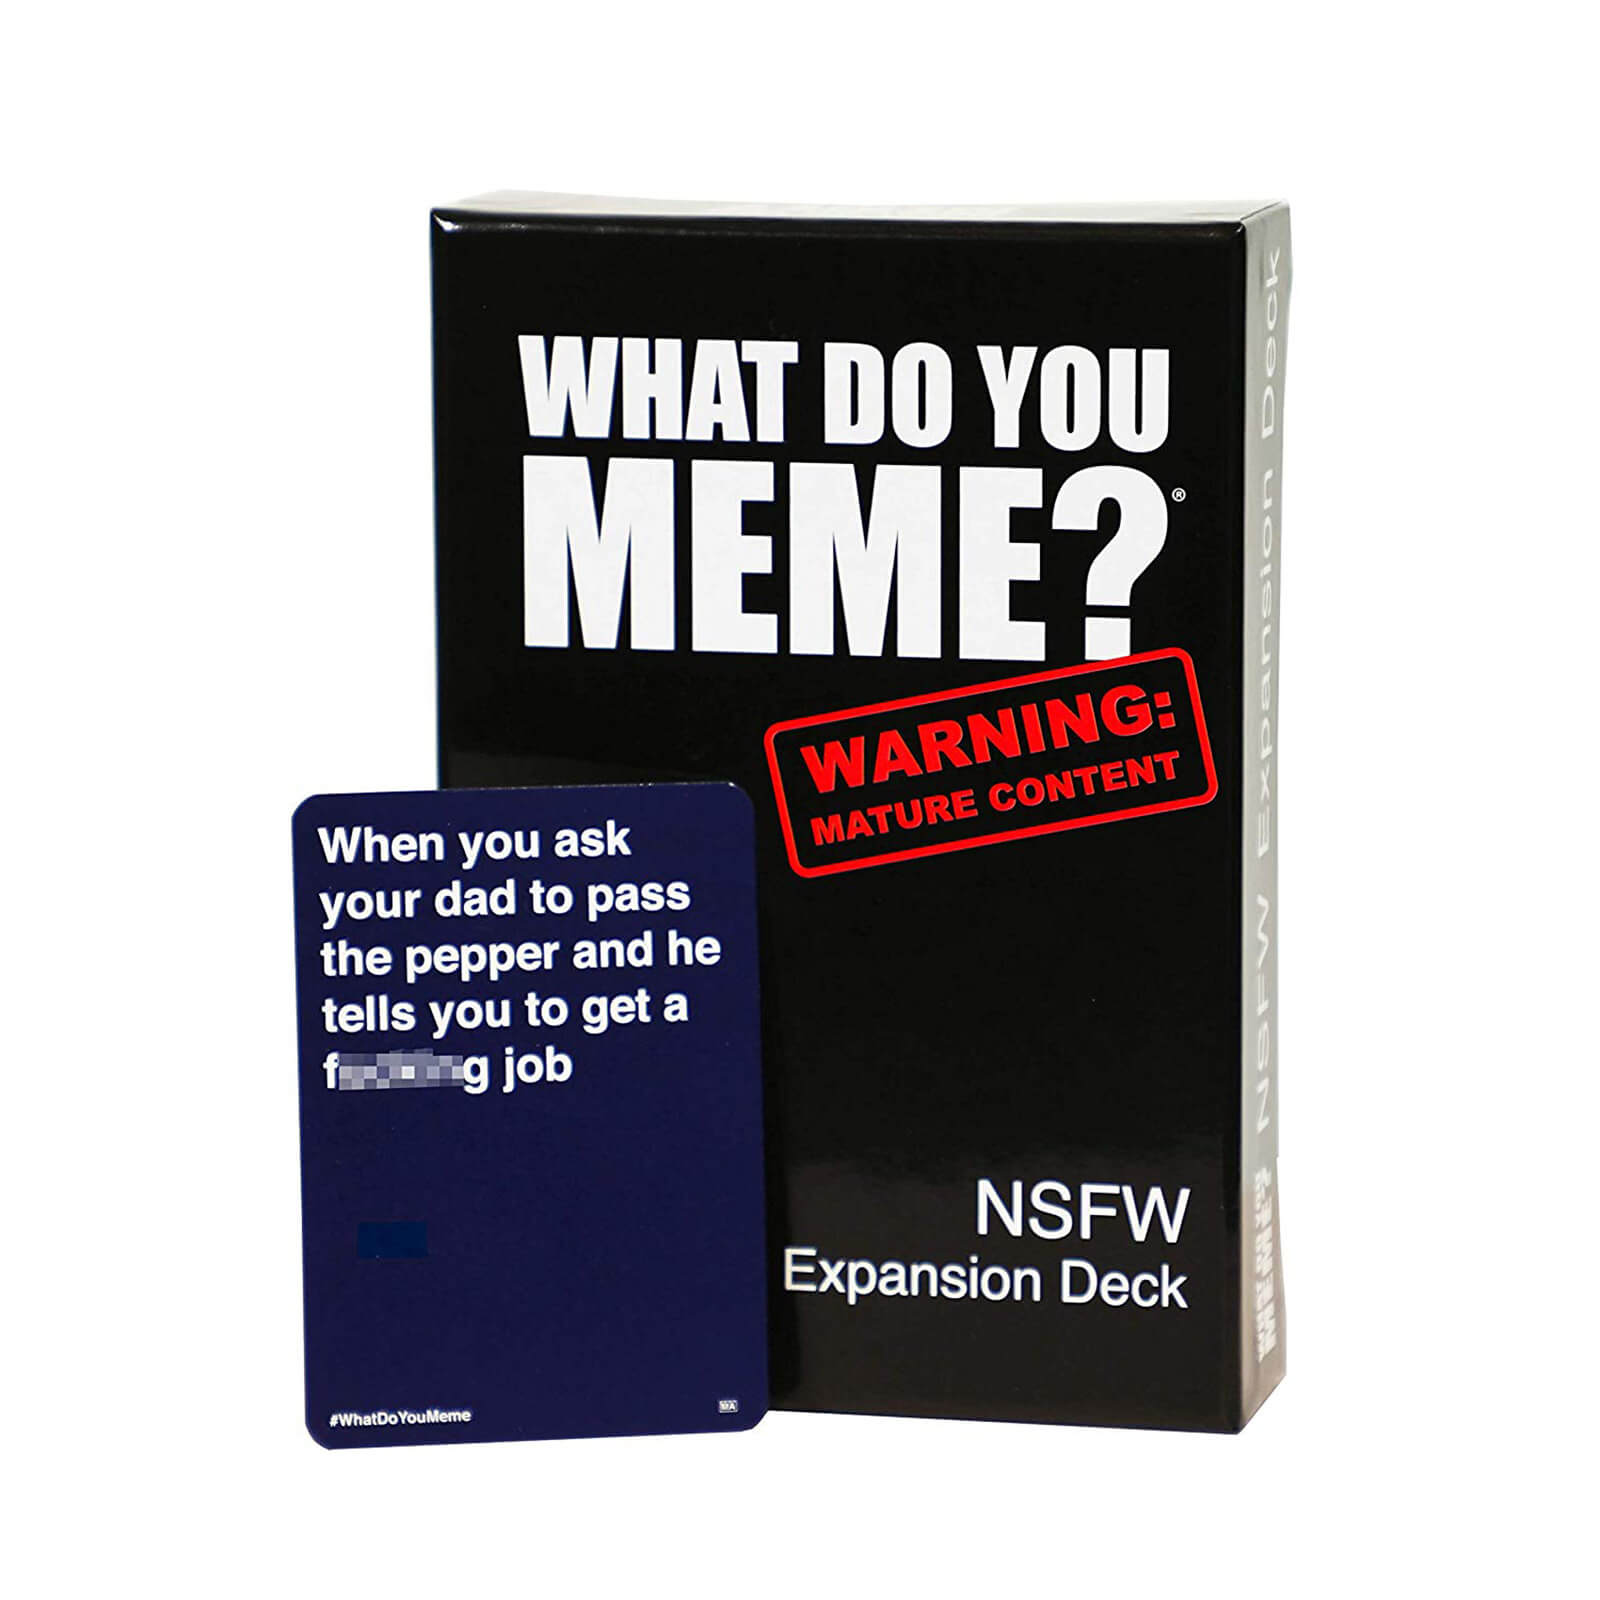 What Do You Meme? NSFW Expansion Pack Card Game